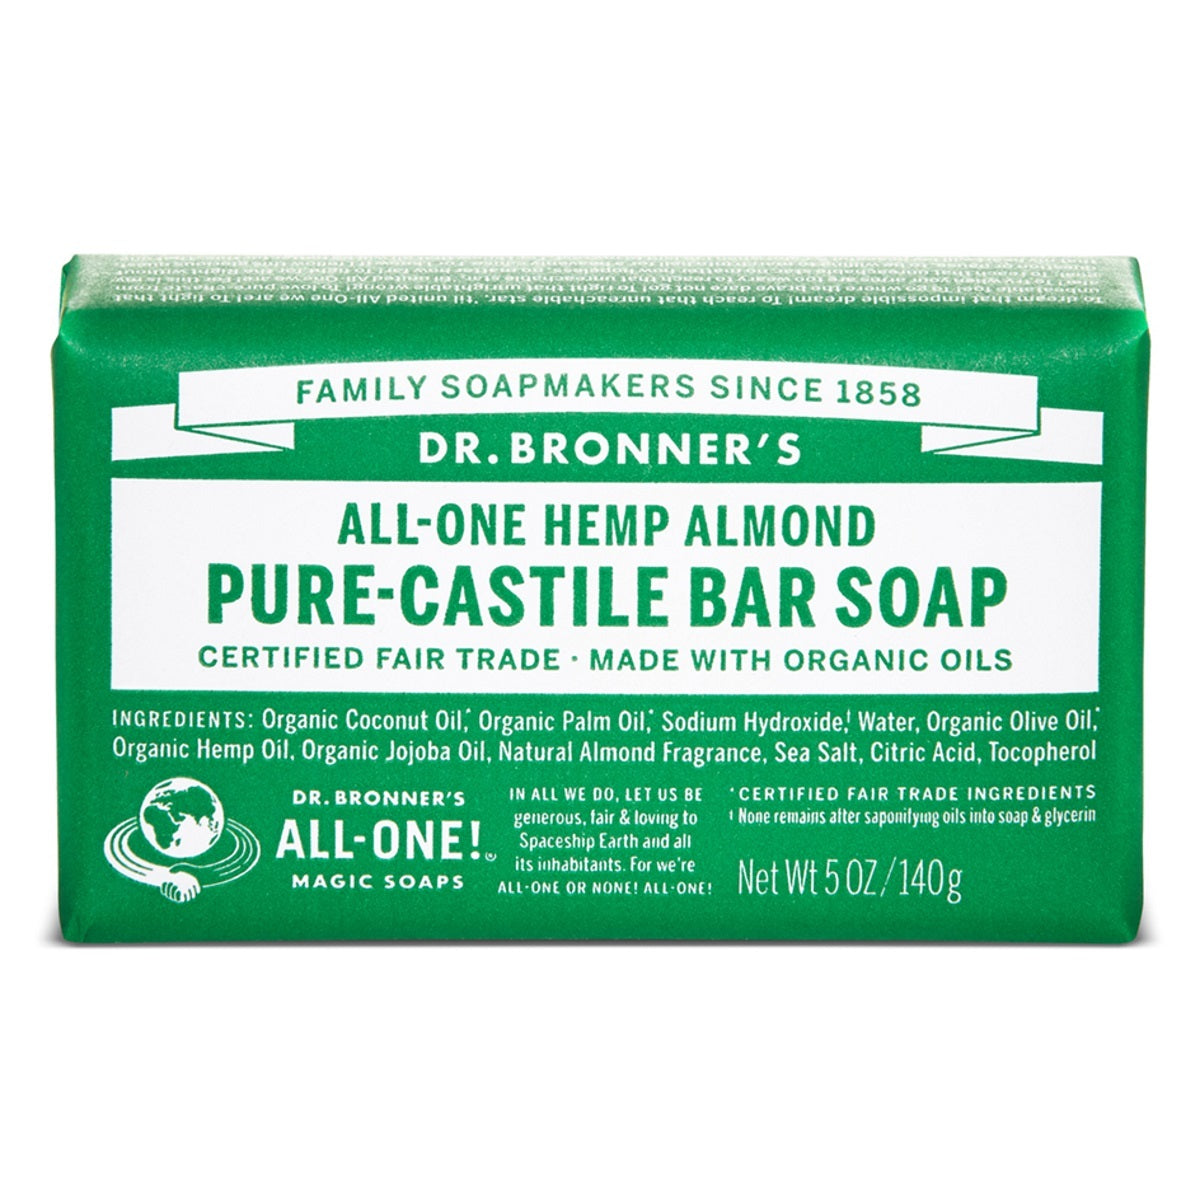 Primary image of Almond Castile Bar Soap